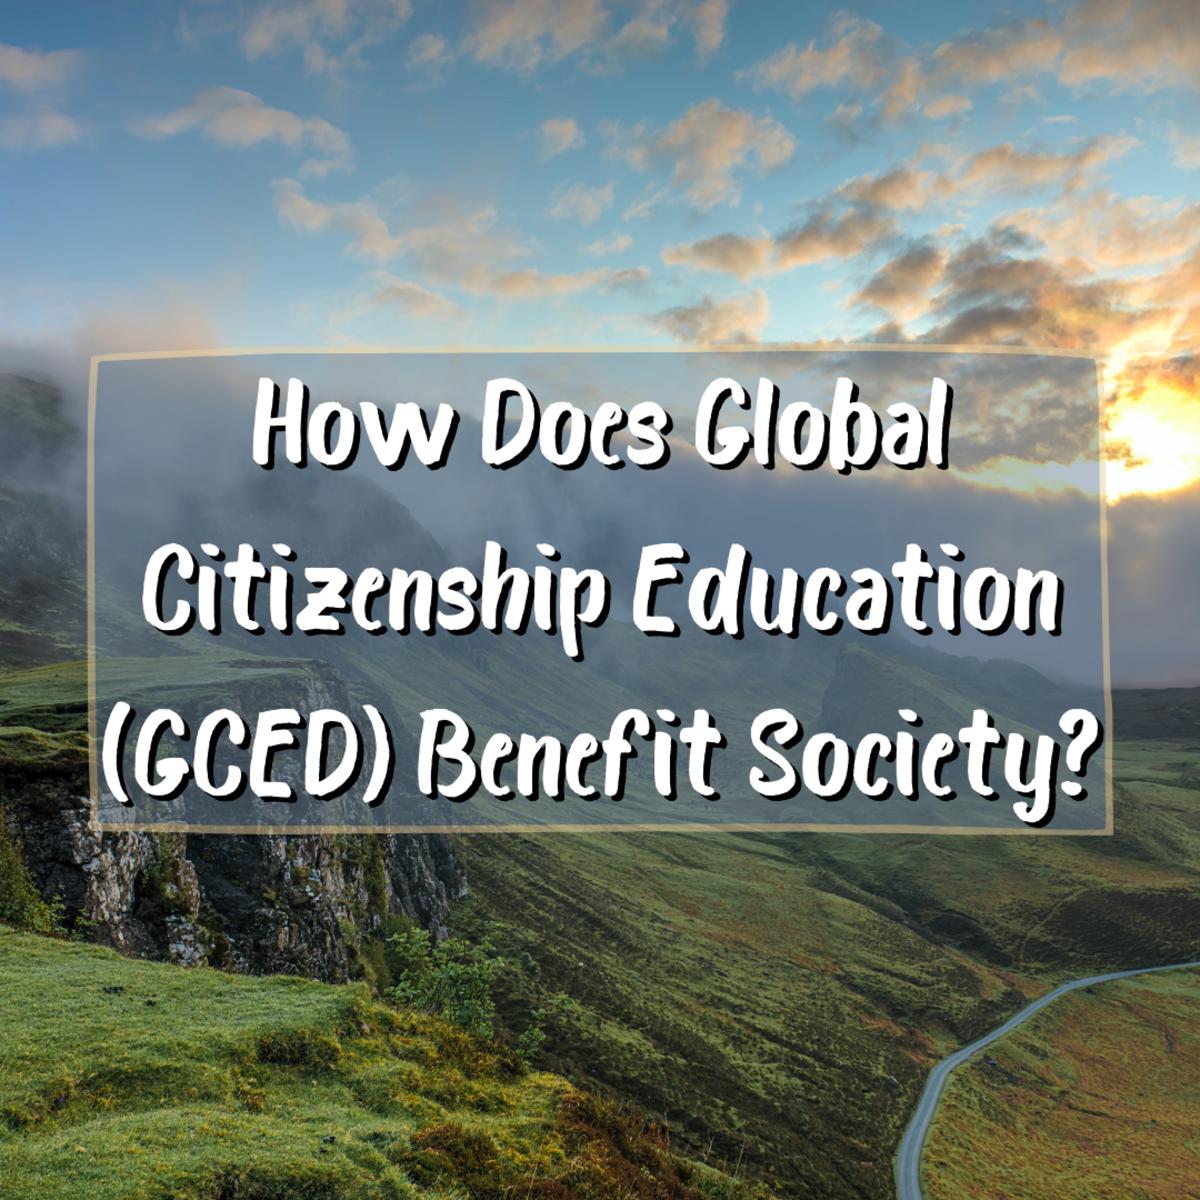 Read on to learn all about Global Citizenship Education, UNESCO's program to help educate and empower everyday people to make positive changes for the global environment.